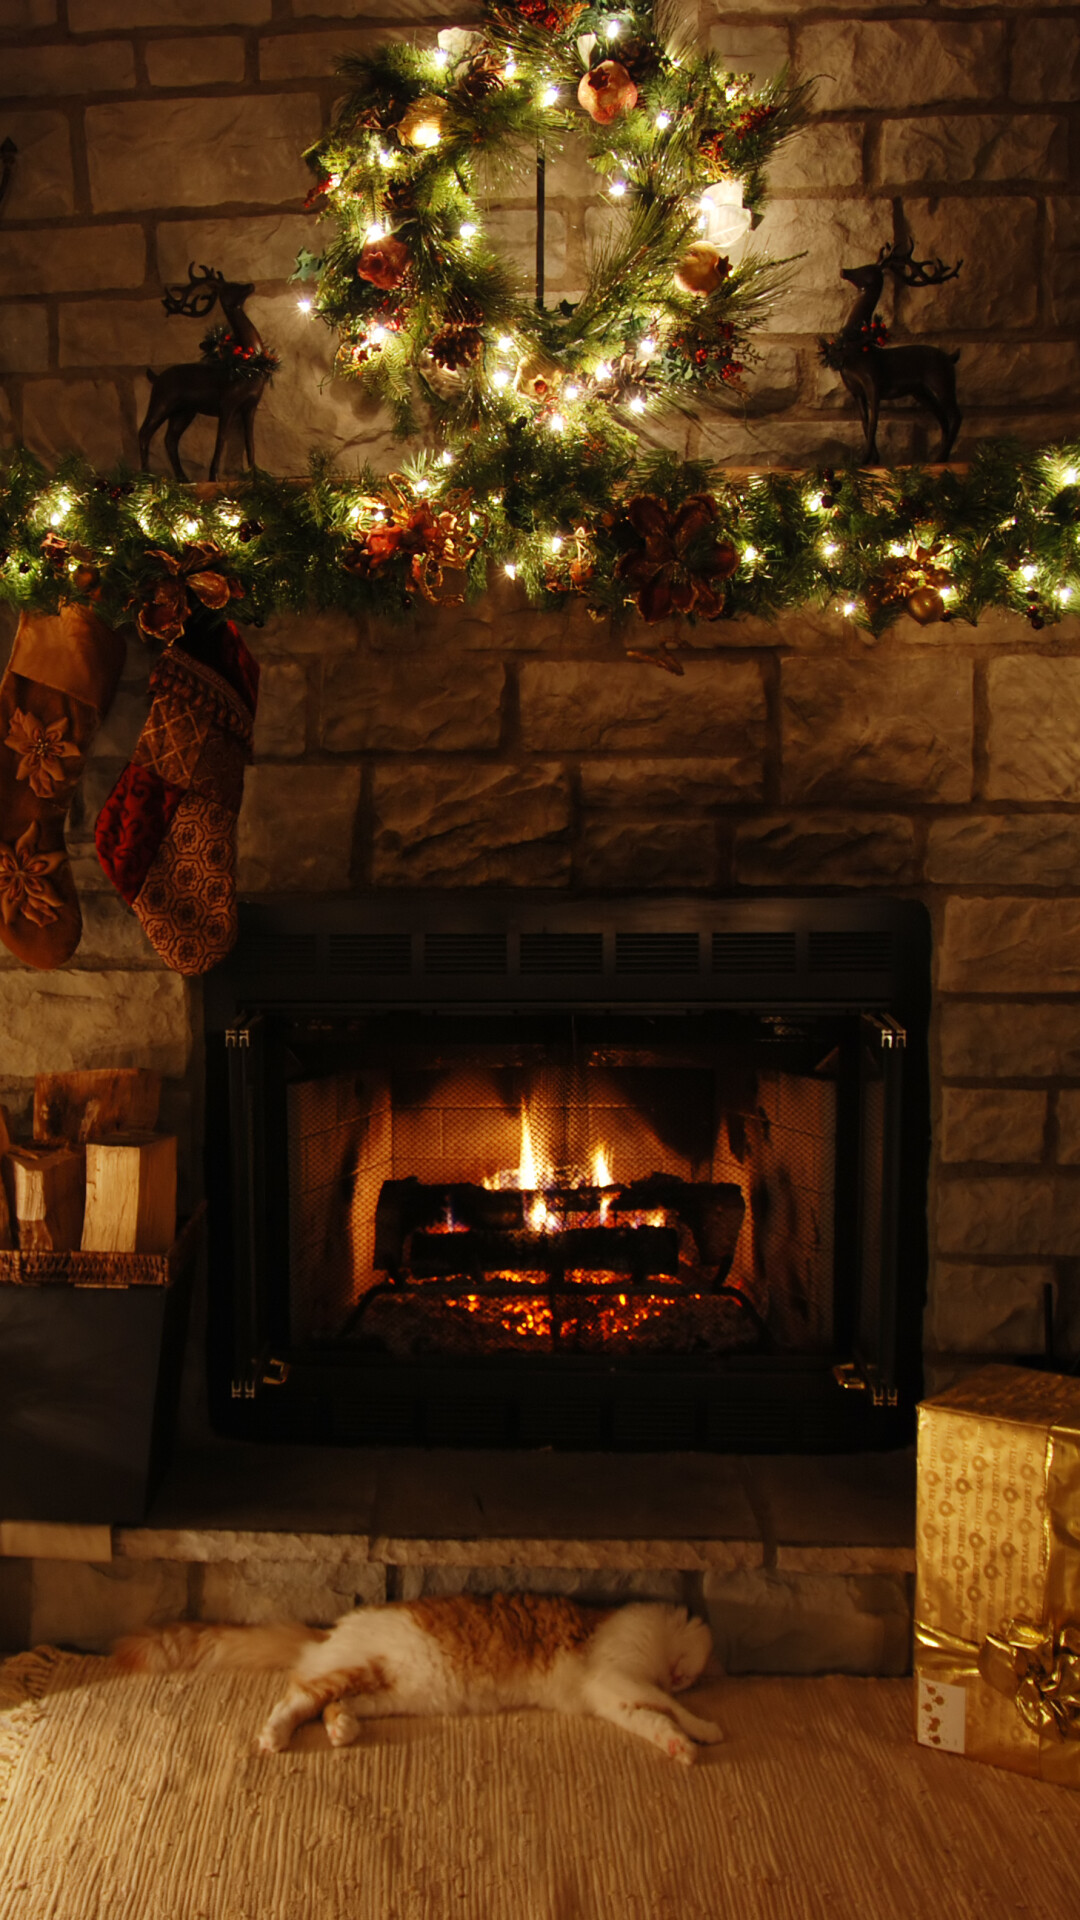 Christmas Fireplace: Wood, Hearth, Decoration, Fairy lights. 1080x1920 Full HD Background.